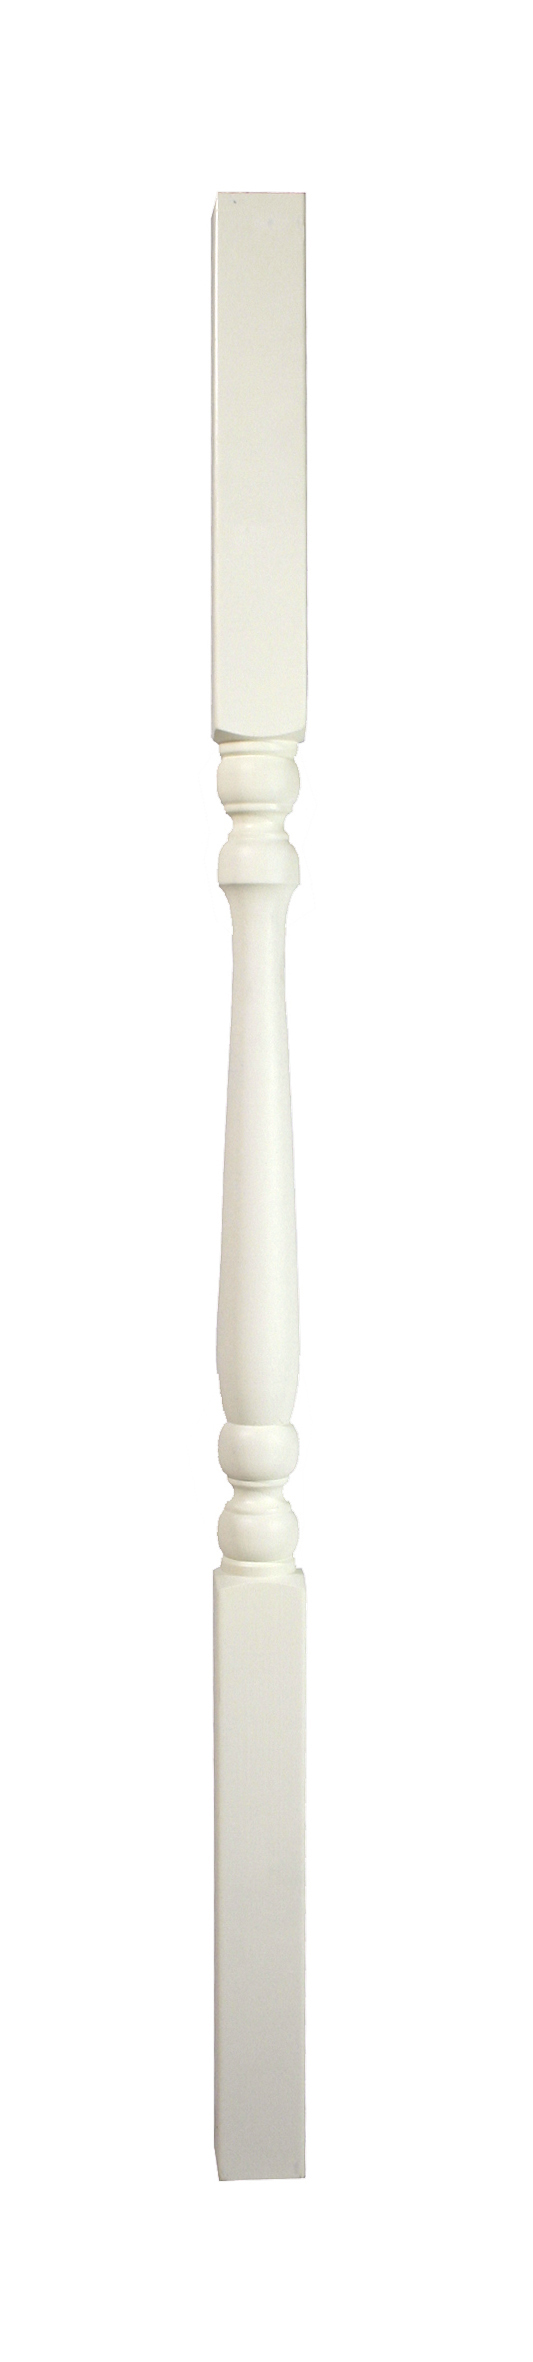 1 Smooth Primed Colonial Spindle 900 41